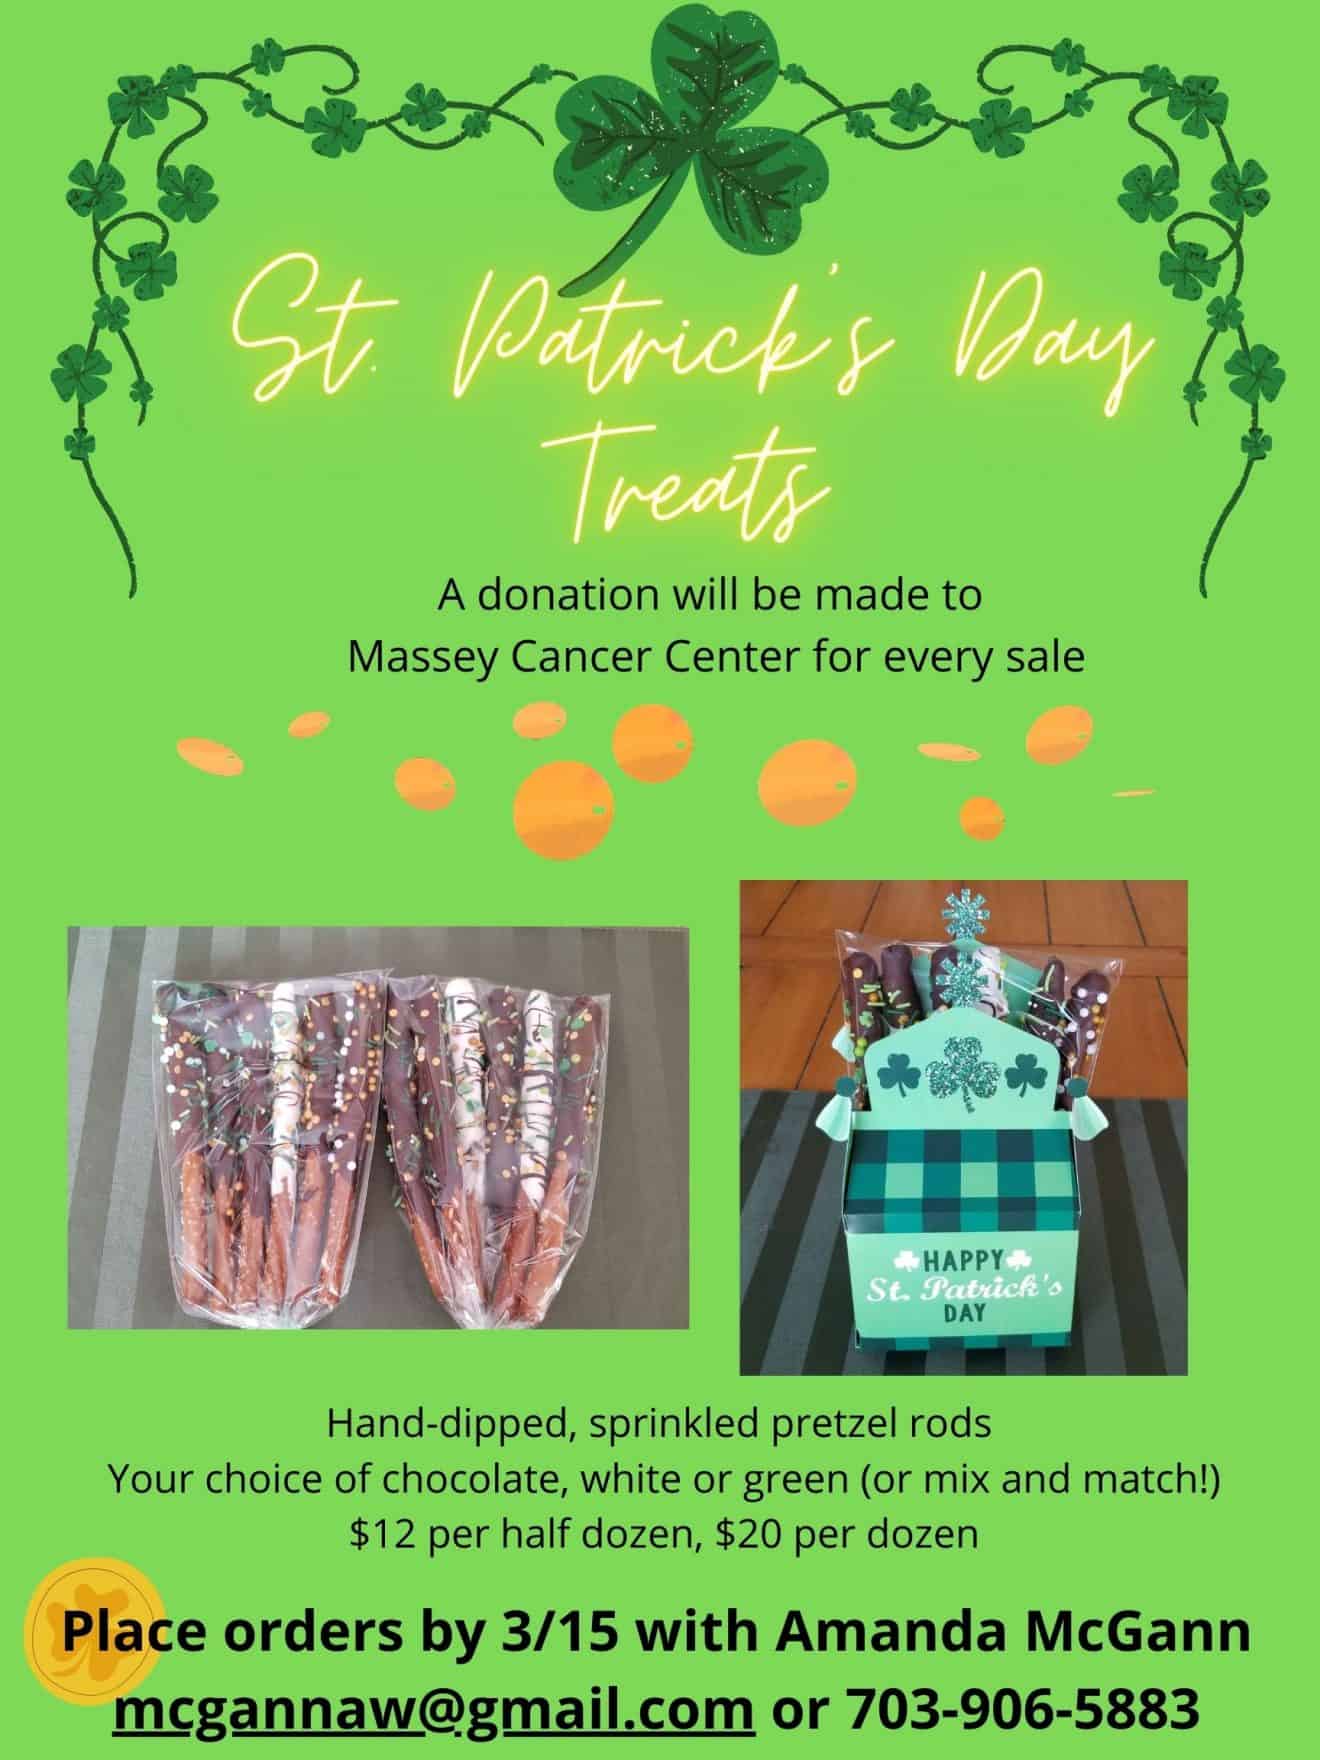 Place your order for St. Patrick's Day Treats